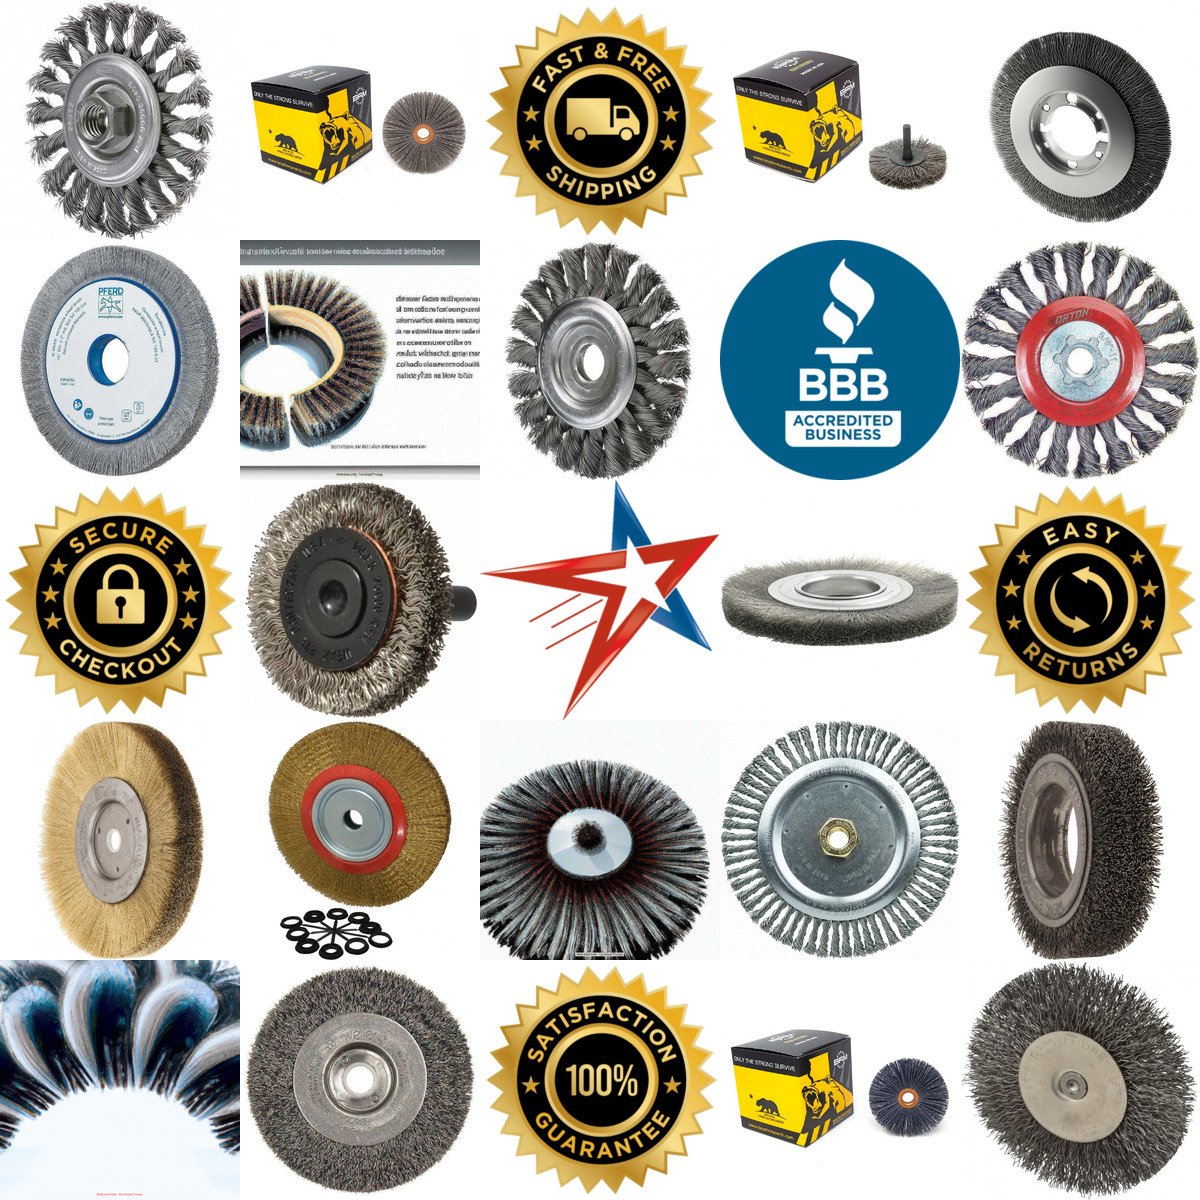 A selection of Wheel Brushes products on GoVets